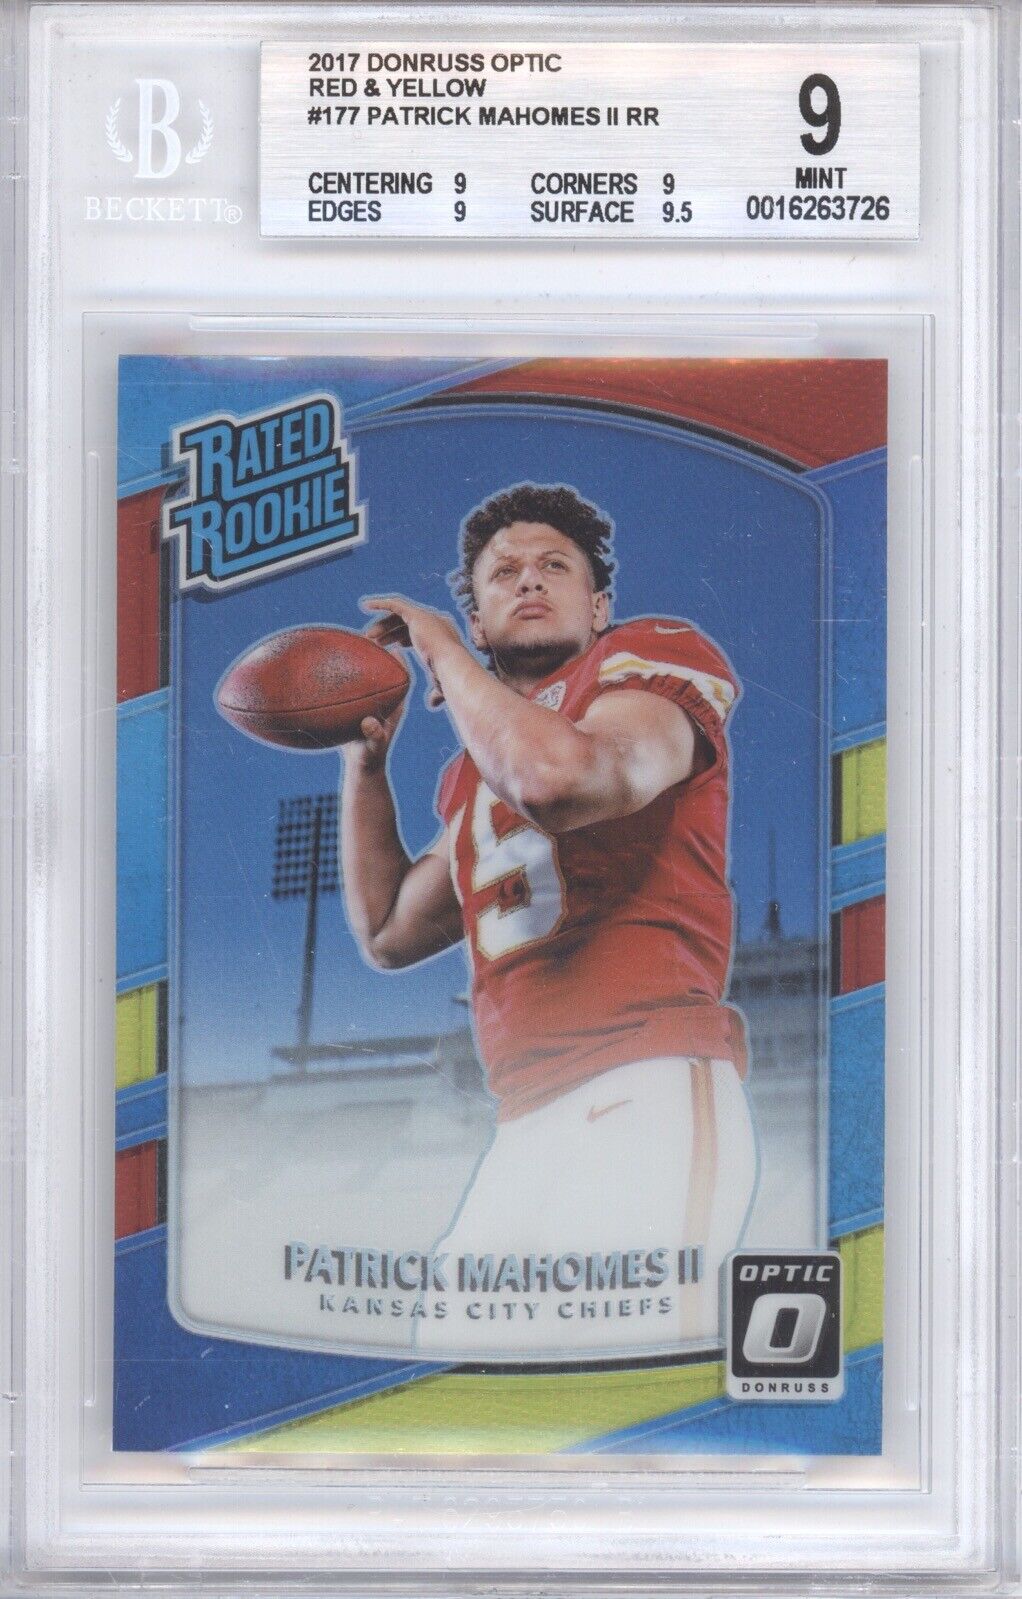 PATRICK MAHOMES II BGS 9 2017 DONRUSS OPTIC #177 RATED ROOKIE RED & YELLOW RC 26